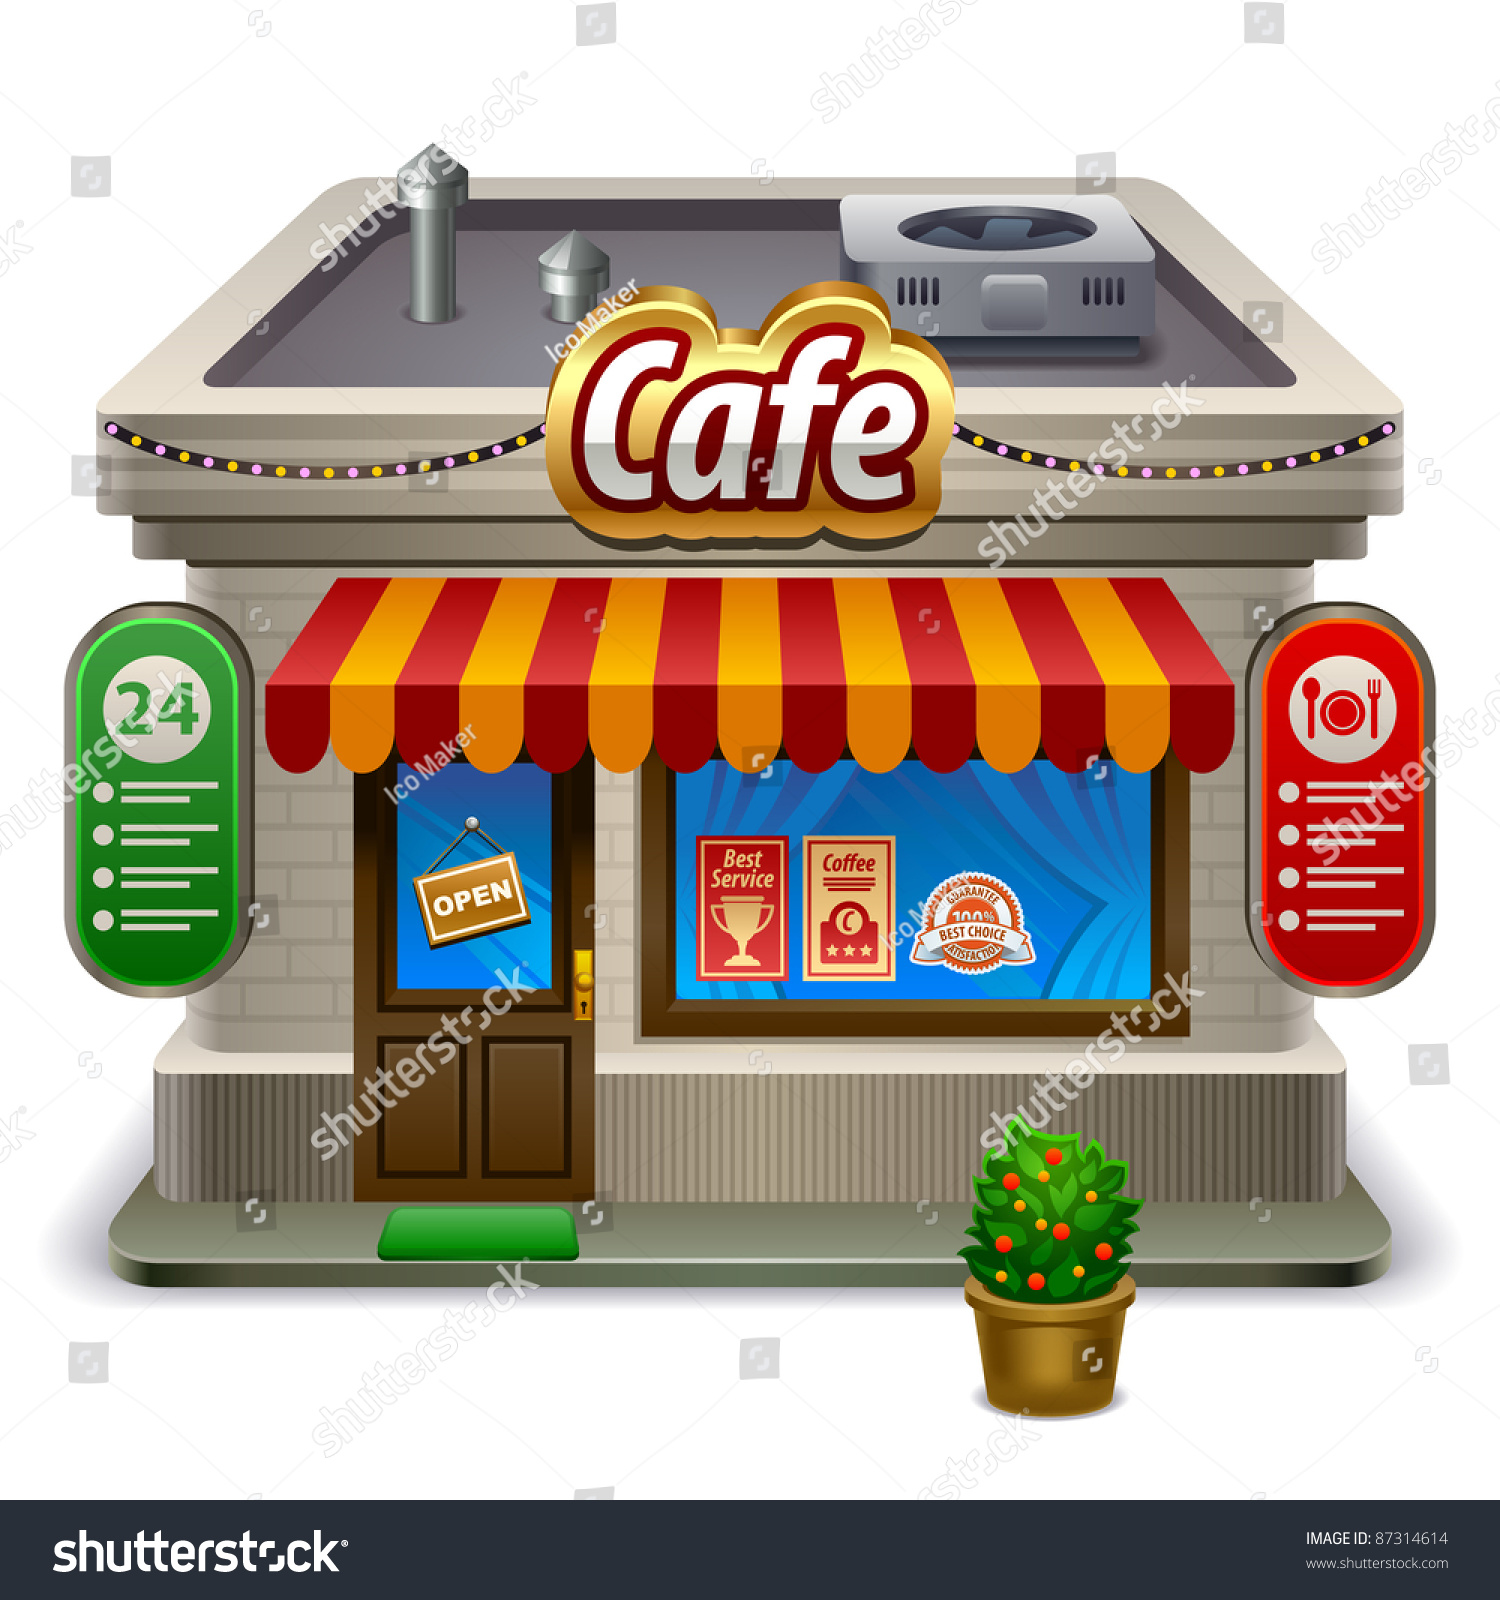 clipart pause cafe - photo #42